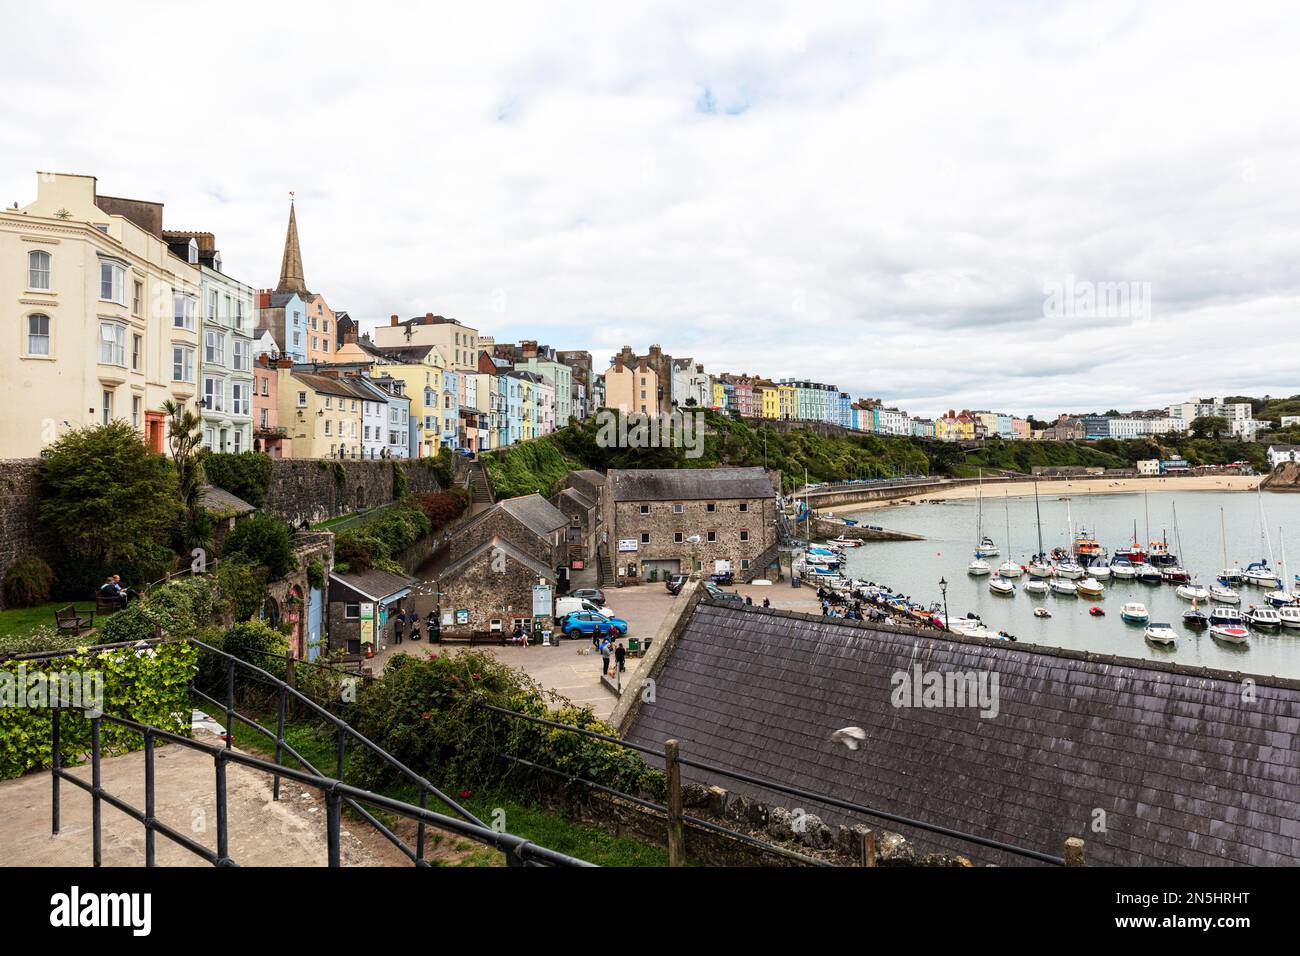 Tenby harbour and town houses overlooking, Tenby, Pembrokeshire, Wales, Tenby harbor, Tenby Wales, Tenby UK, harbour, harbor, UK, houses, boats, boat Stock Photo